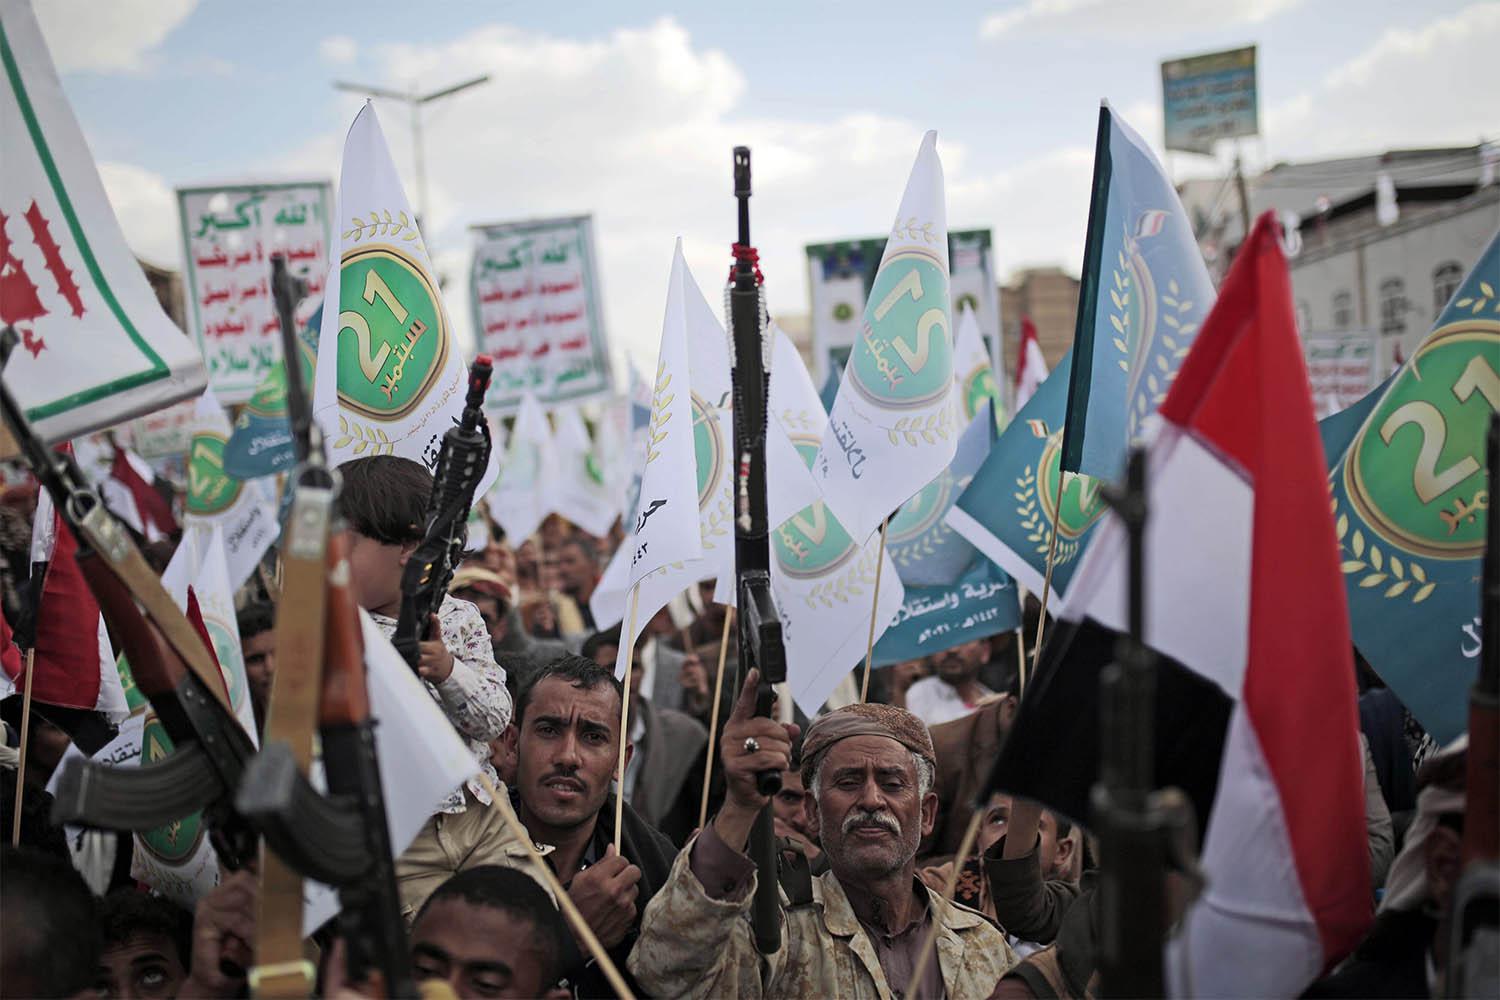 The sanctions are aimed at a source of the Houthi rebel group's financial support